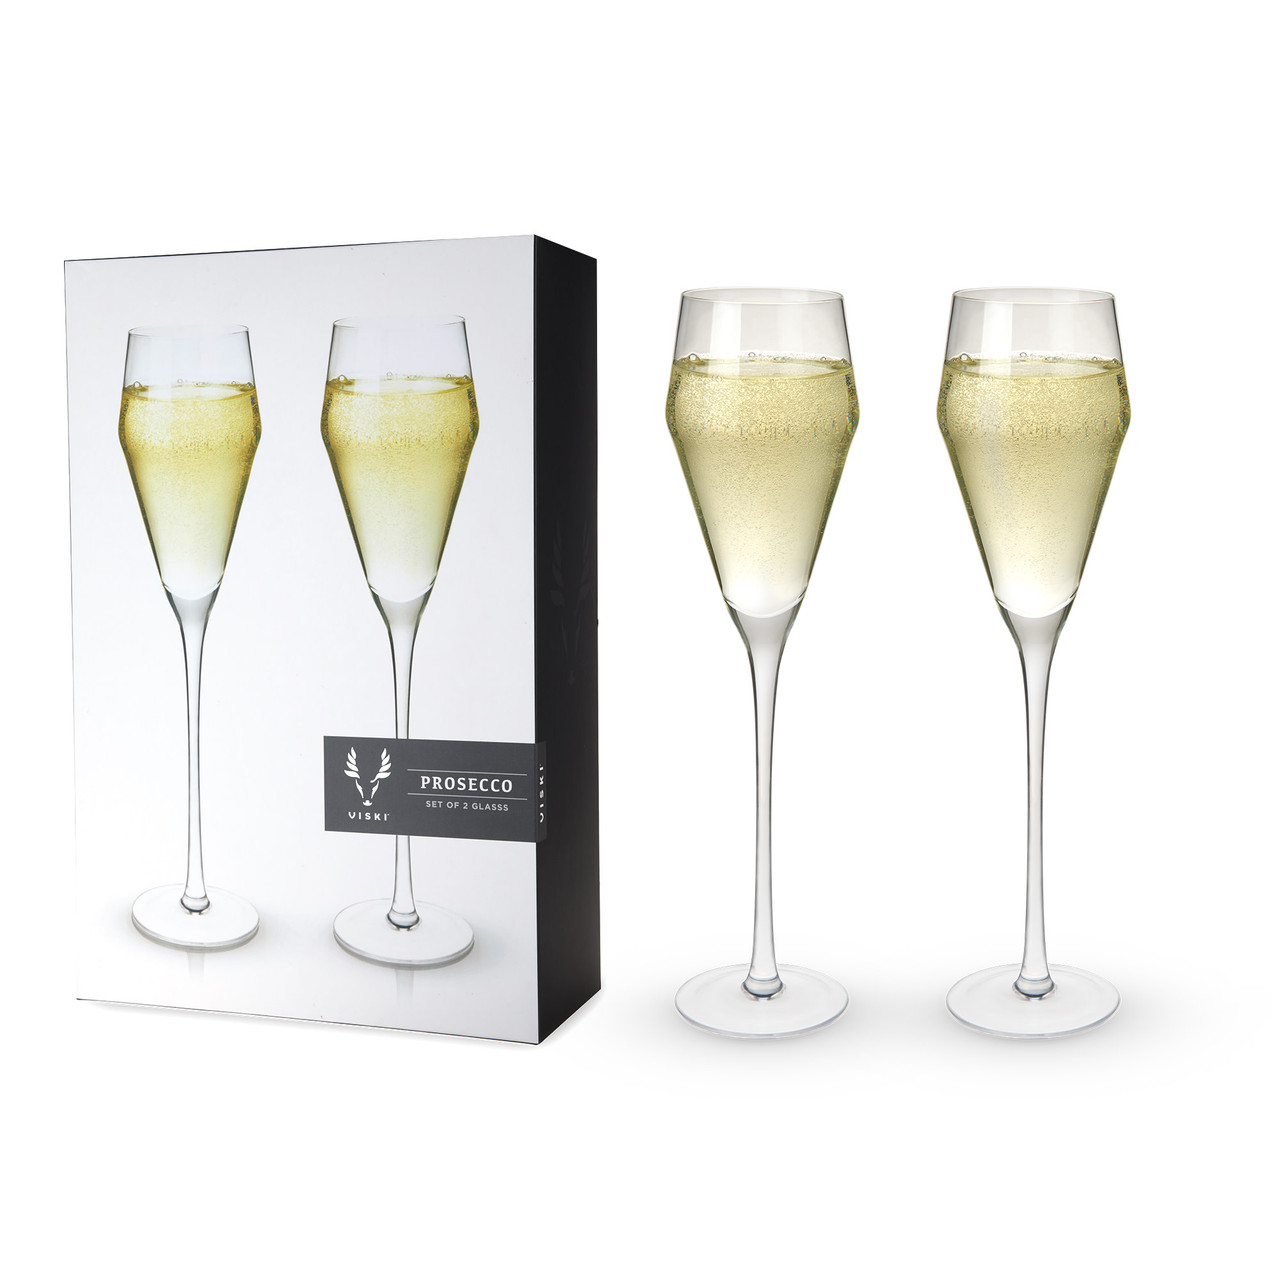 https://cdn11.bigcommerce.com/s-oo0gdojvjo/images/stencil/1280x1280/products/68544/100687/angled-crystal-prosecco-glasses-by-viski-set-of-2__68493.1683777504.jpg?c=2&imbypass=on